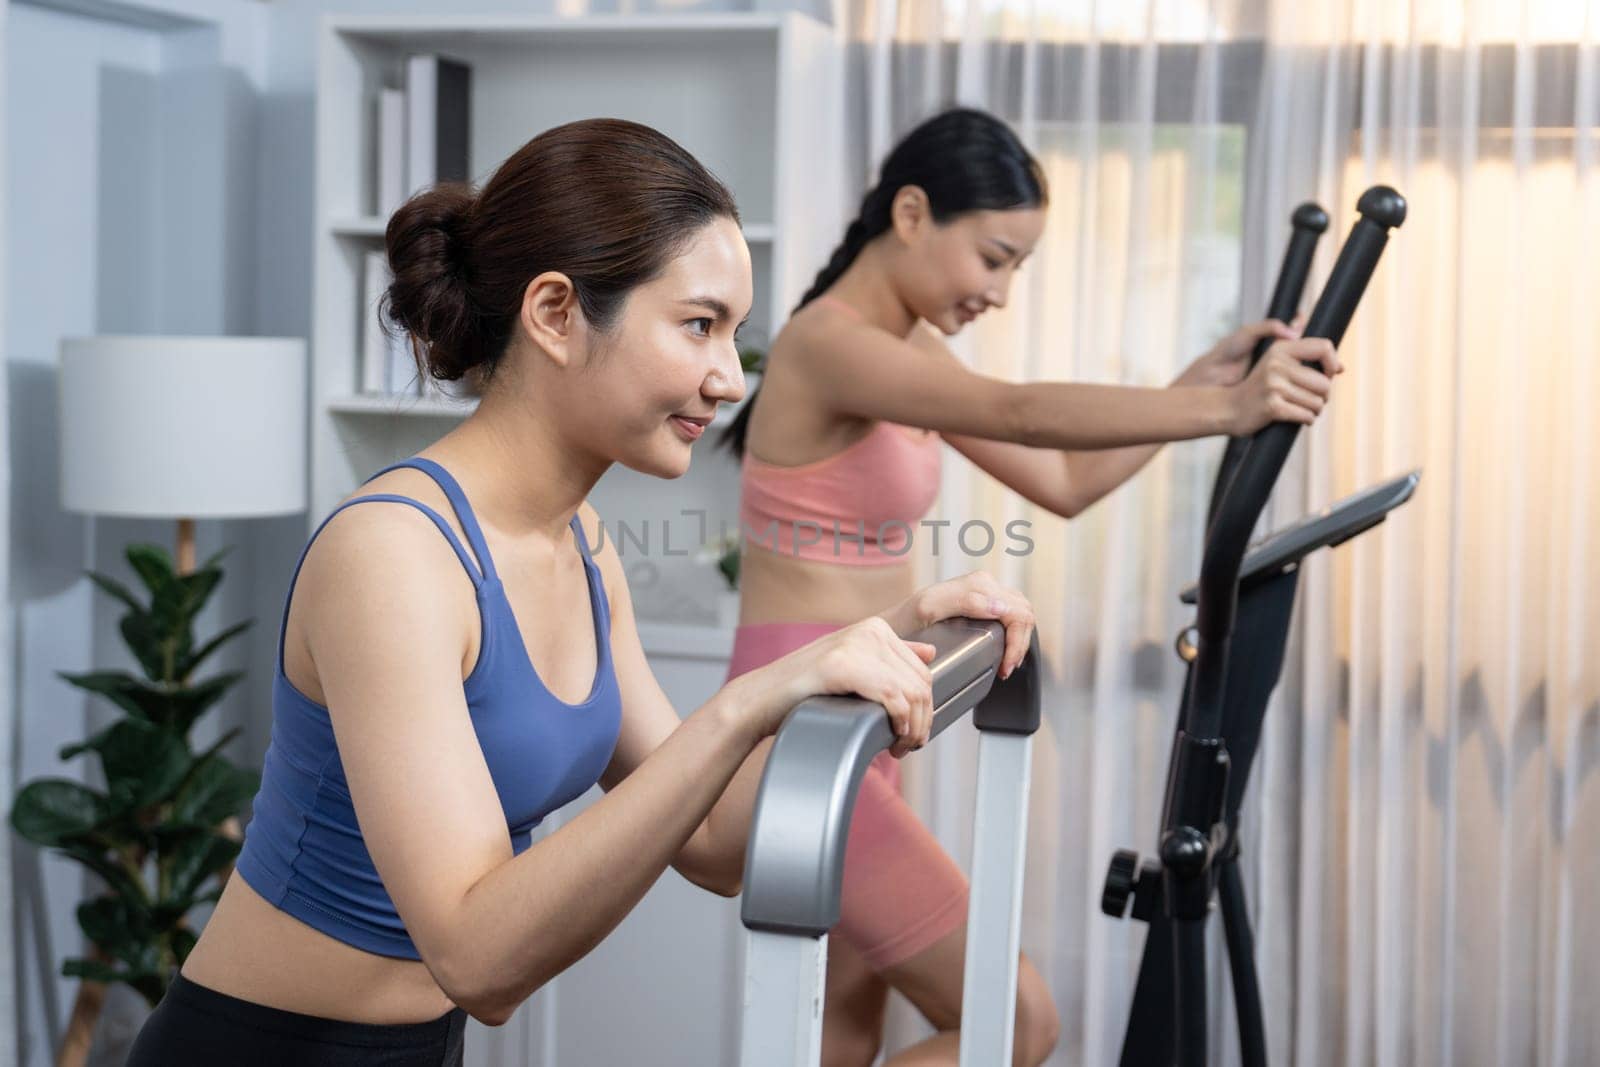 Energetic and strong athletic asian woman running on elliptical running machine at home with workout buddy or trainer. Pursuit of fit physique and commitment to healthy lifestyle. Vigorous